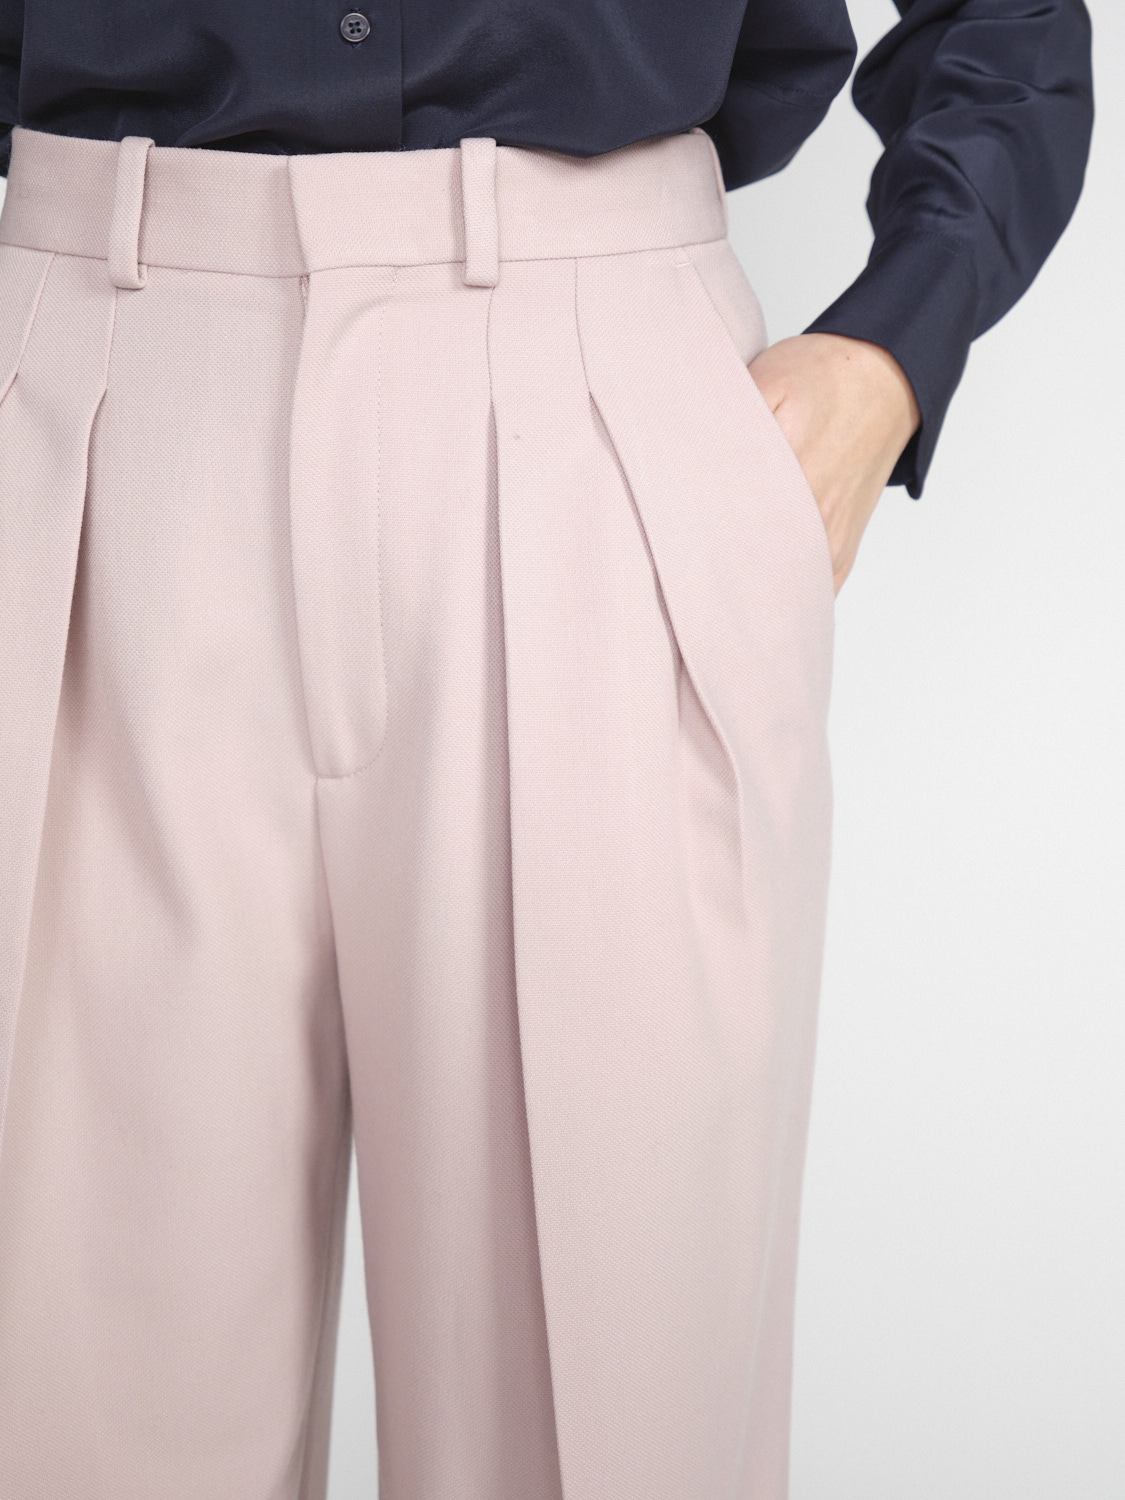 Victoria Beckham Double Pleat Trouser - Pleated trousers in virgin wool mix  rose 34